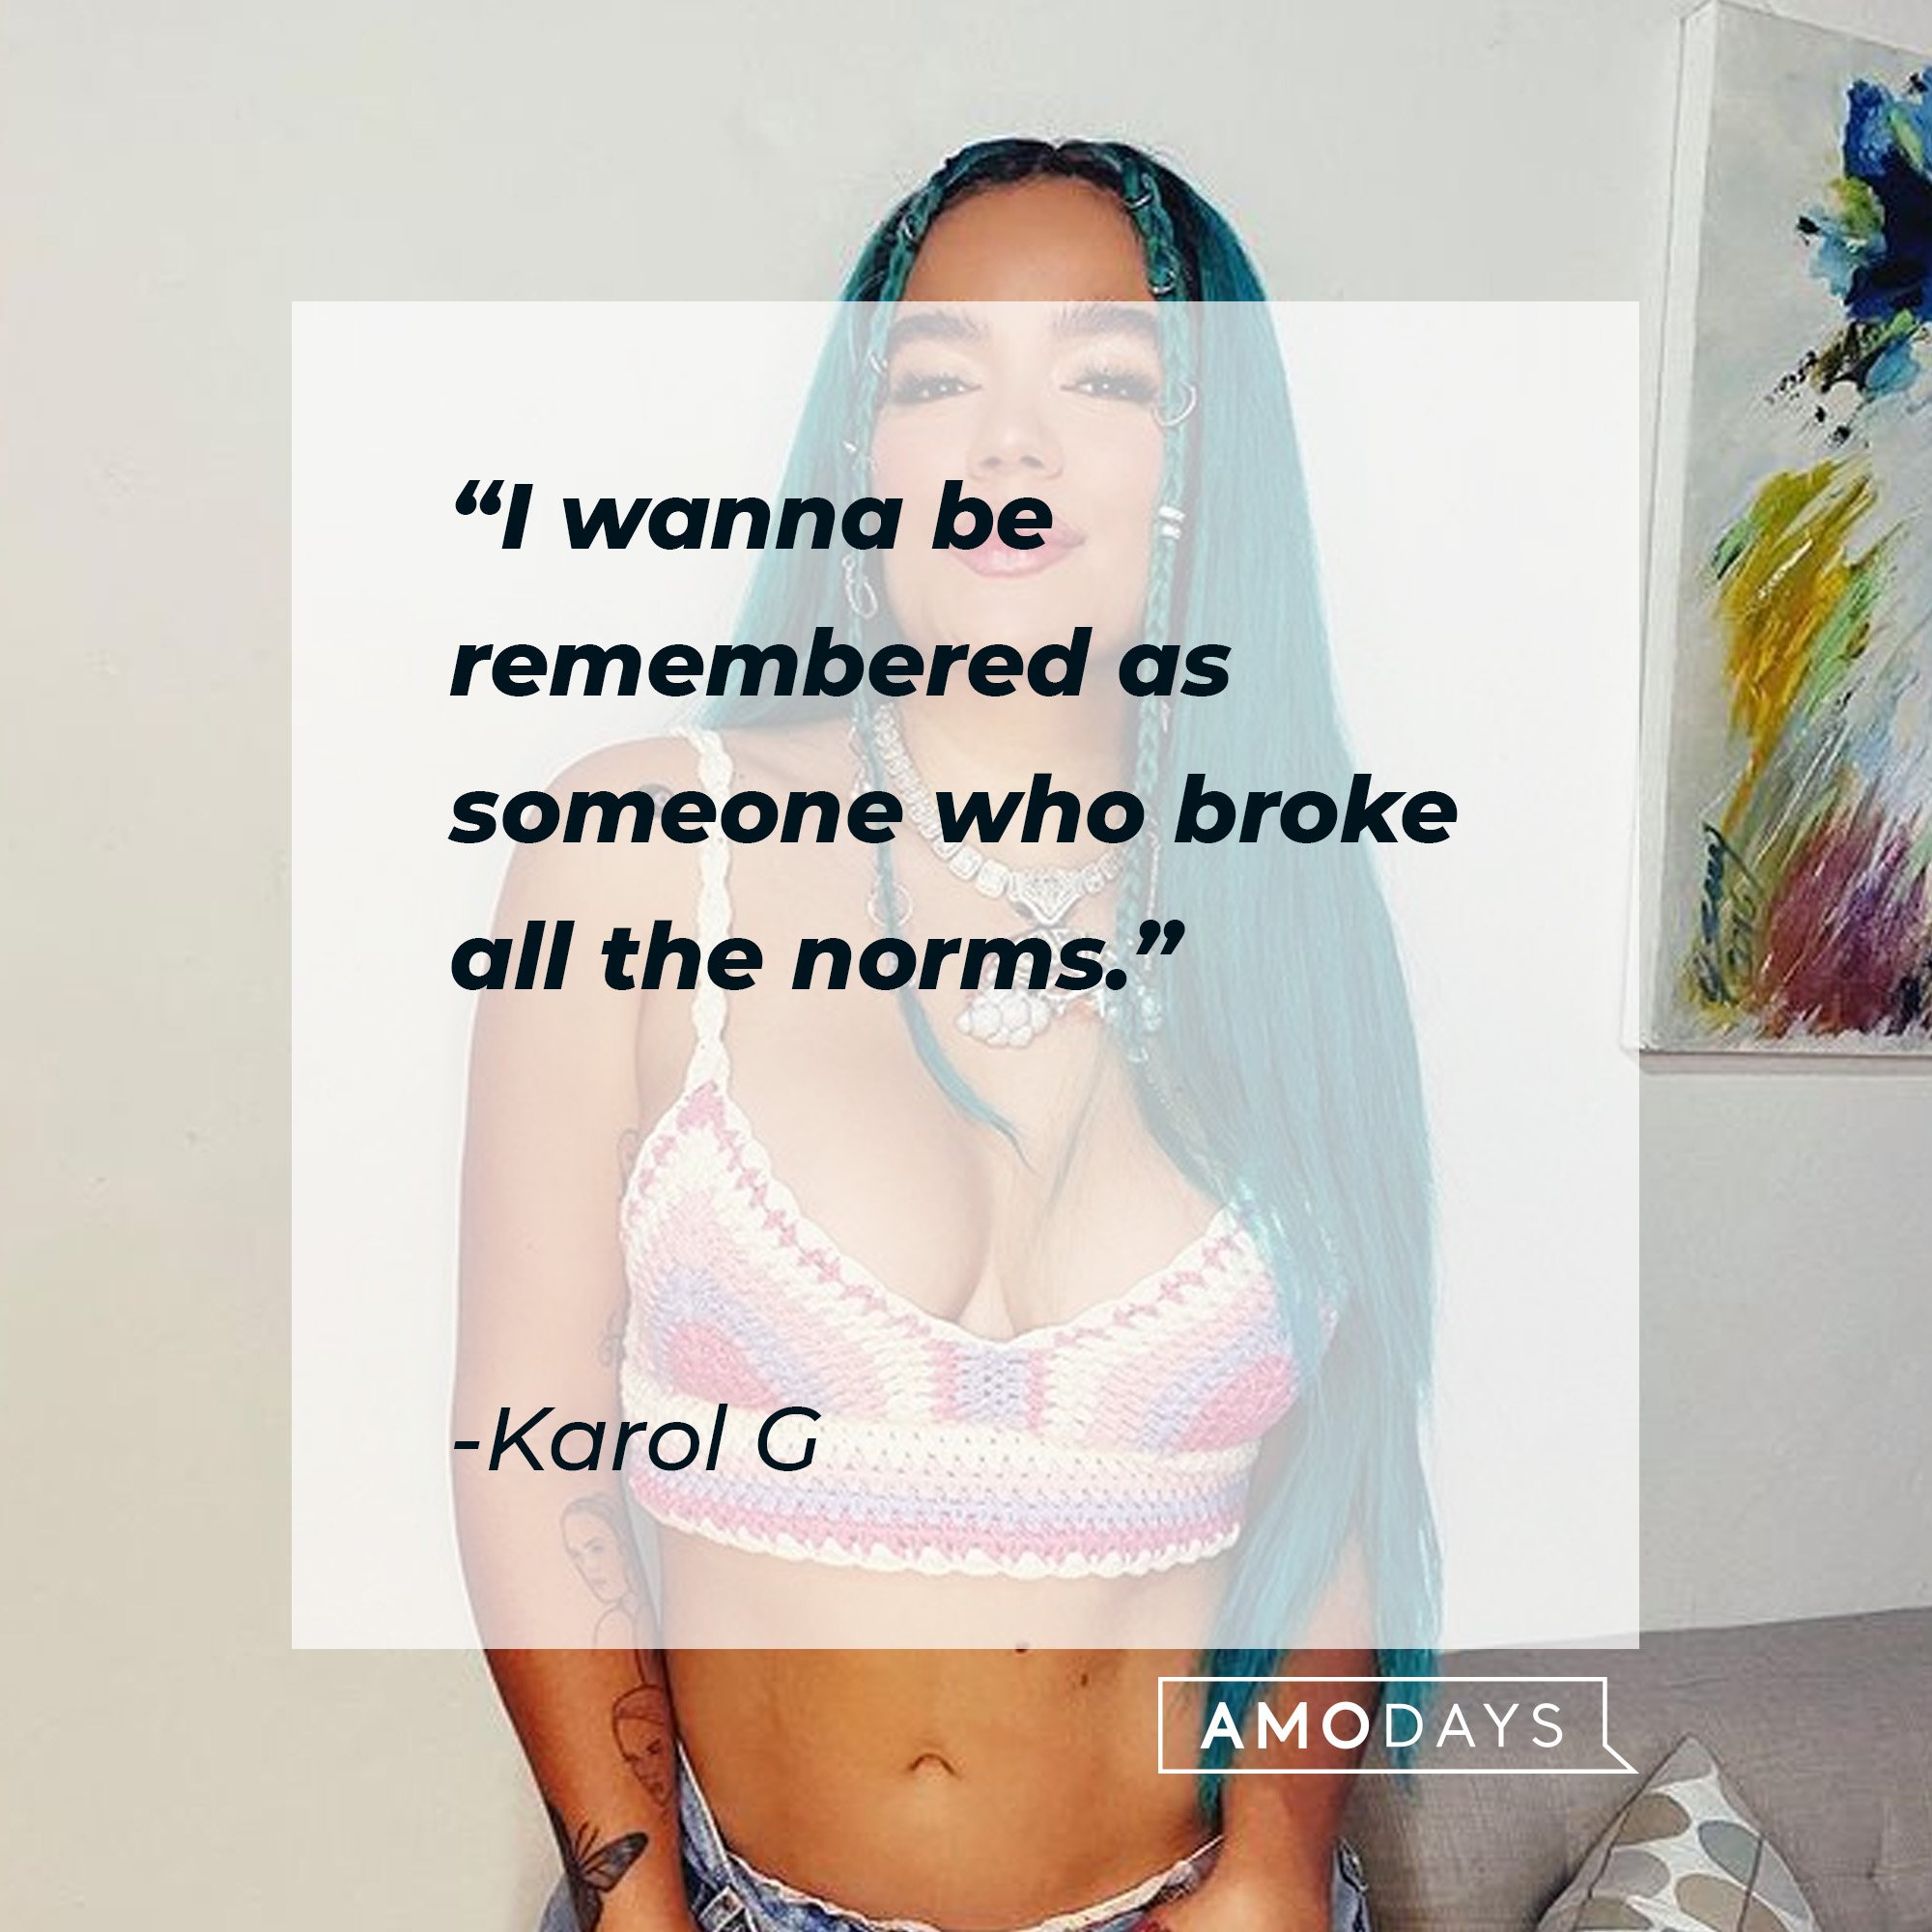 Karol G’s quote: "I wanna be remembered as someone who broke all the norms." | Image: AmoDays